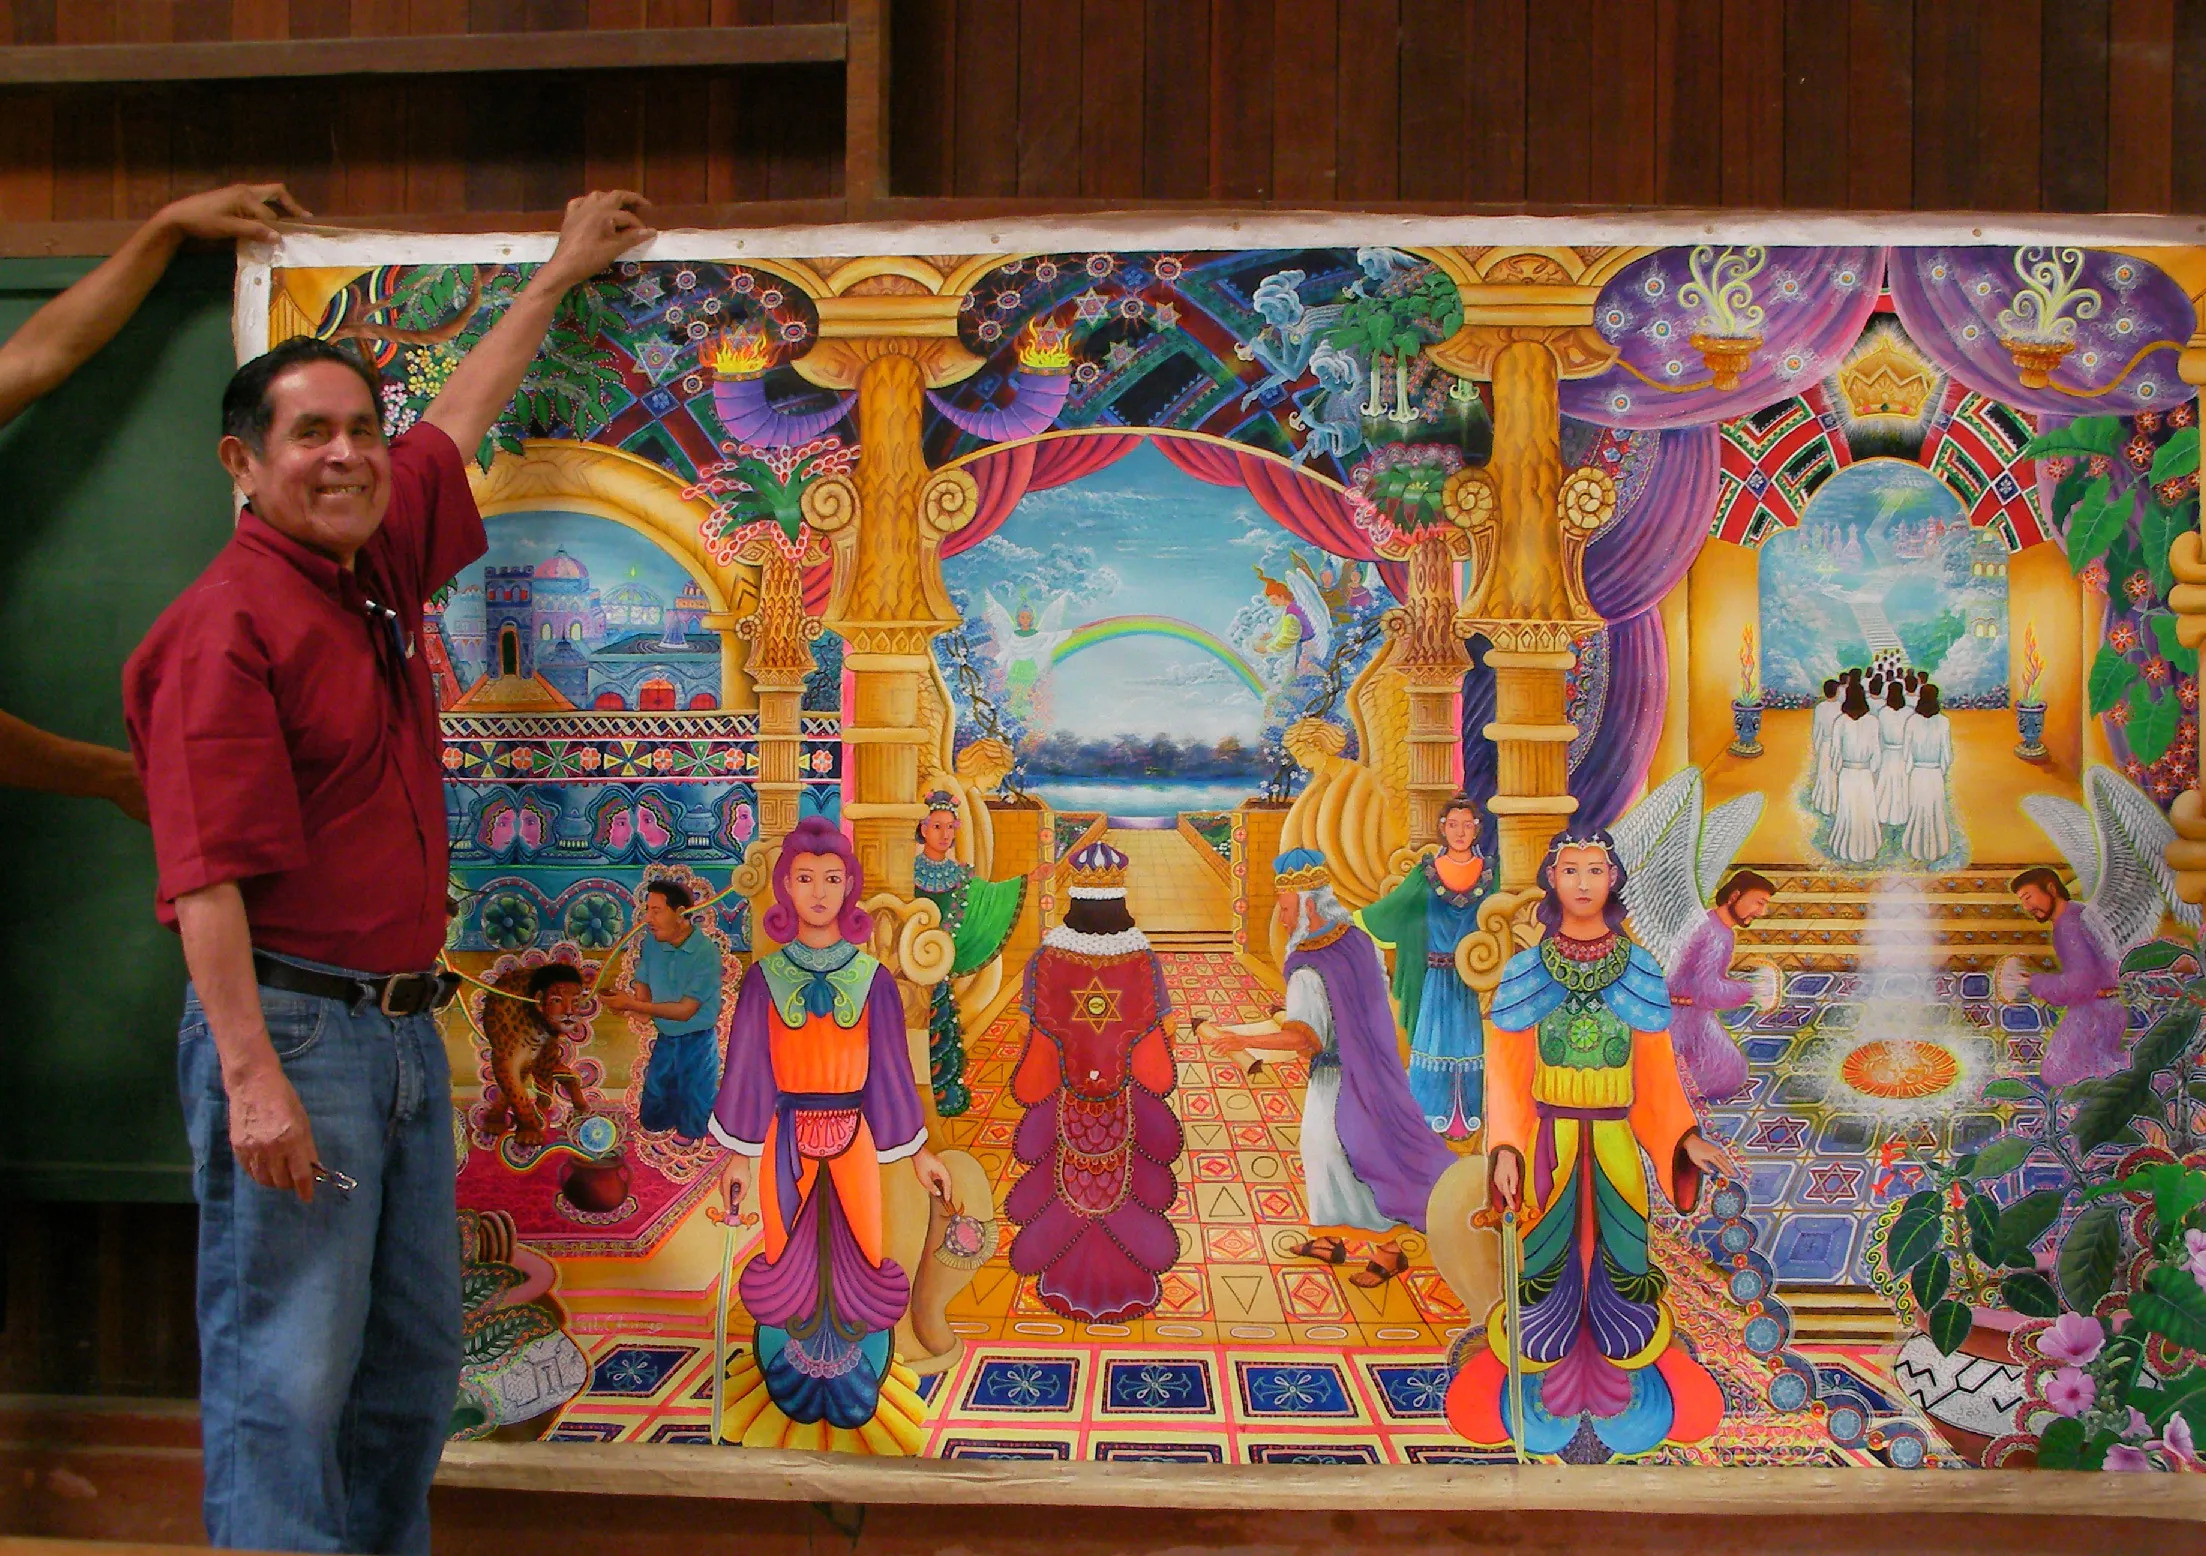 <p>Pablo Amaringo, a revered Peruvian artist and shaman, is renowned for his intricate and vibrant paintings inspired by his ayahuasca visions. As a former shaman of the Shipibo-Conibo indigenous people, Amaringo underwent profound spiritual experiences during his ayahuasca ceremonies, which he skillfully translated onto canvas. His artwork depicts intricate Amazonian landscapes, mythical beings, and spiritual realms, offering viewers a glimpse into the storied history of indigenous cosmology and shamanic wisdom. Through his paintings, Amaringo sought to convey the healing power of ayahuasca and the interconnectedness of all life forms, fostering a deeper appreciation for the natural world and the spiritual dimensions that permeate it. His book <strong><a href="https://blackwells.co.uk/bookshop/product/The-Ayahuasca-Visions-of-Pablo-Amaringo-by-Howard-G-Charing-Peter-Cloudsley-Pablo-Amaringo/9781594773457">The Ayahuasca Visions of Pablo Amaringo</a></strong> provides full-color reproductions of his works with detailed explorations of the rich Amazonian mythology underlying each painting. Amaringo's legacy continues to resonate within the psychedelic community, inspiring awe and reverence for the transformative potential of plant medicines and the visionary insights they impart.</p>